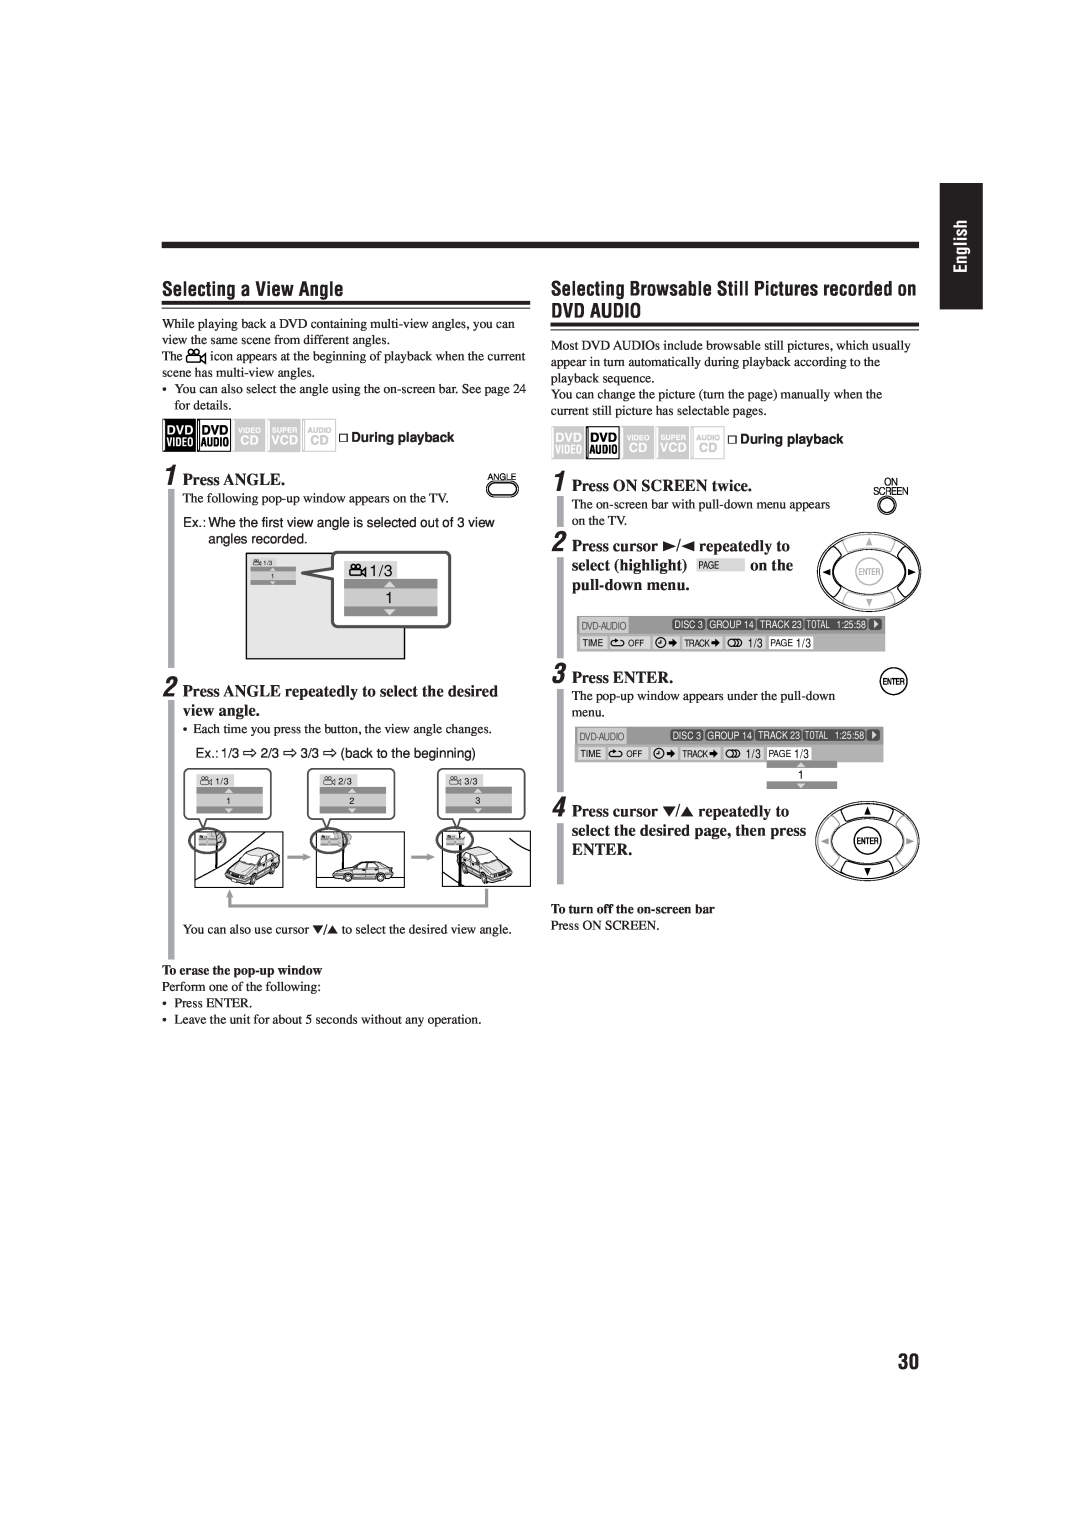 JVC UX-J99DVD manual Selecting a View Angle, Selecting Browsable Still Pictures recorded on, Dvd Audio, Press ANGLE, Enter 